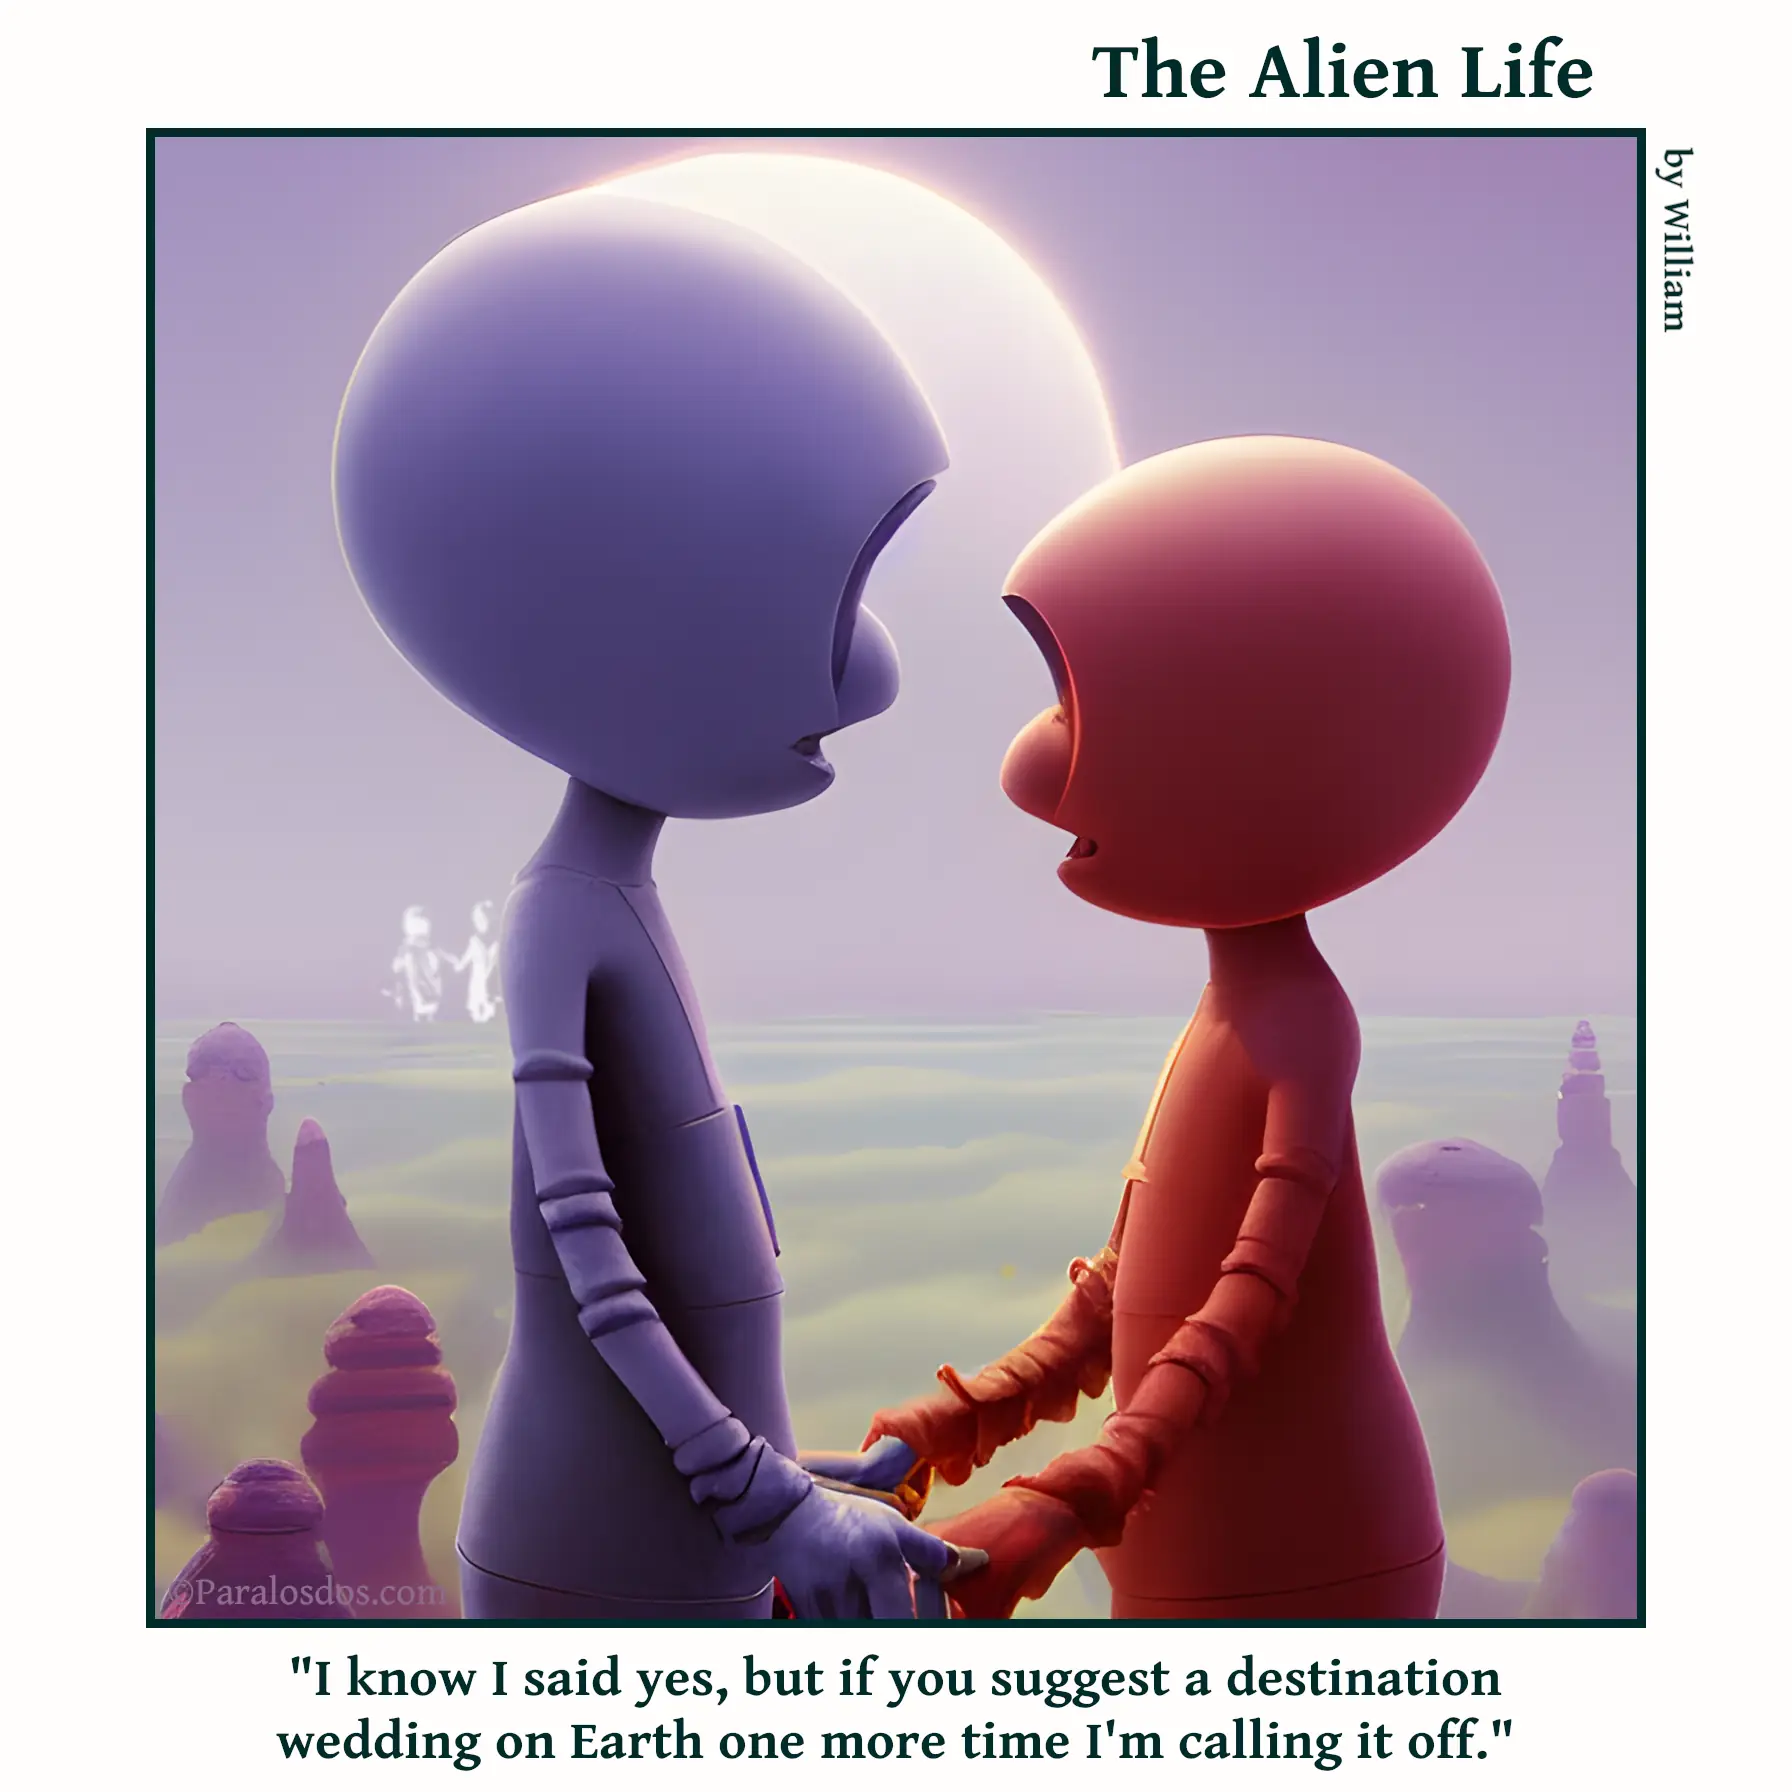 The Alien Life, one panel Comic. Two aliens are holding hands and facing each other. The caption reads: "I know I said yes, but if you suggest a destination wedding on Earth one more time I'm calling it off."